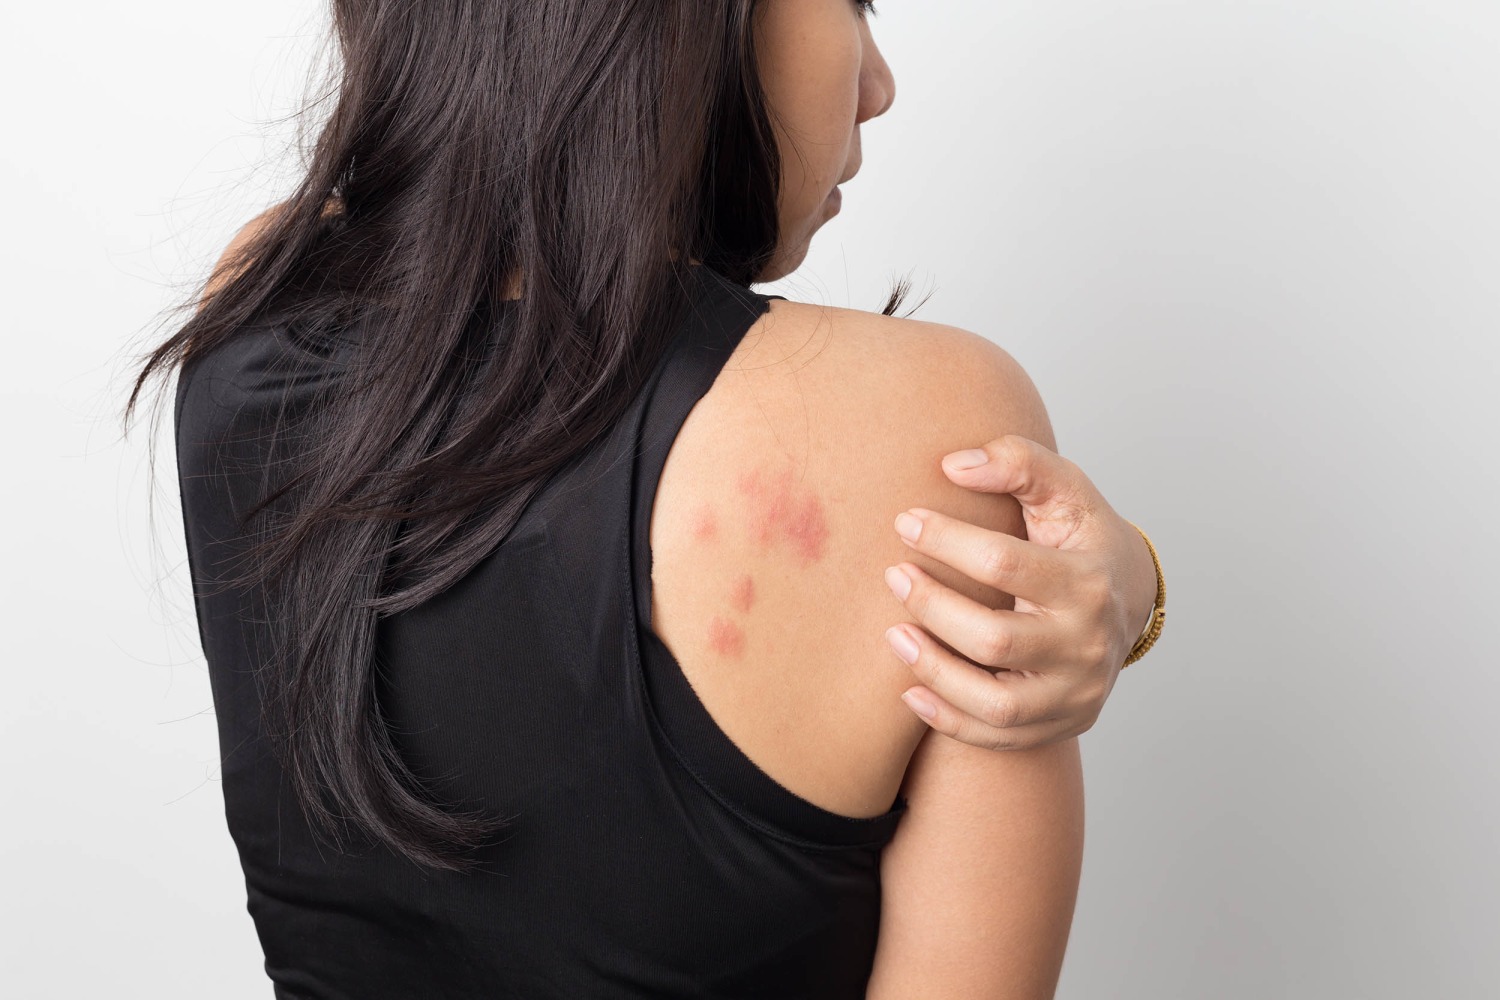 23 Pictures of Skin Rashes - Symptoms & Treatments